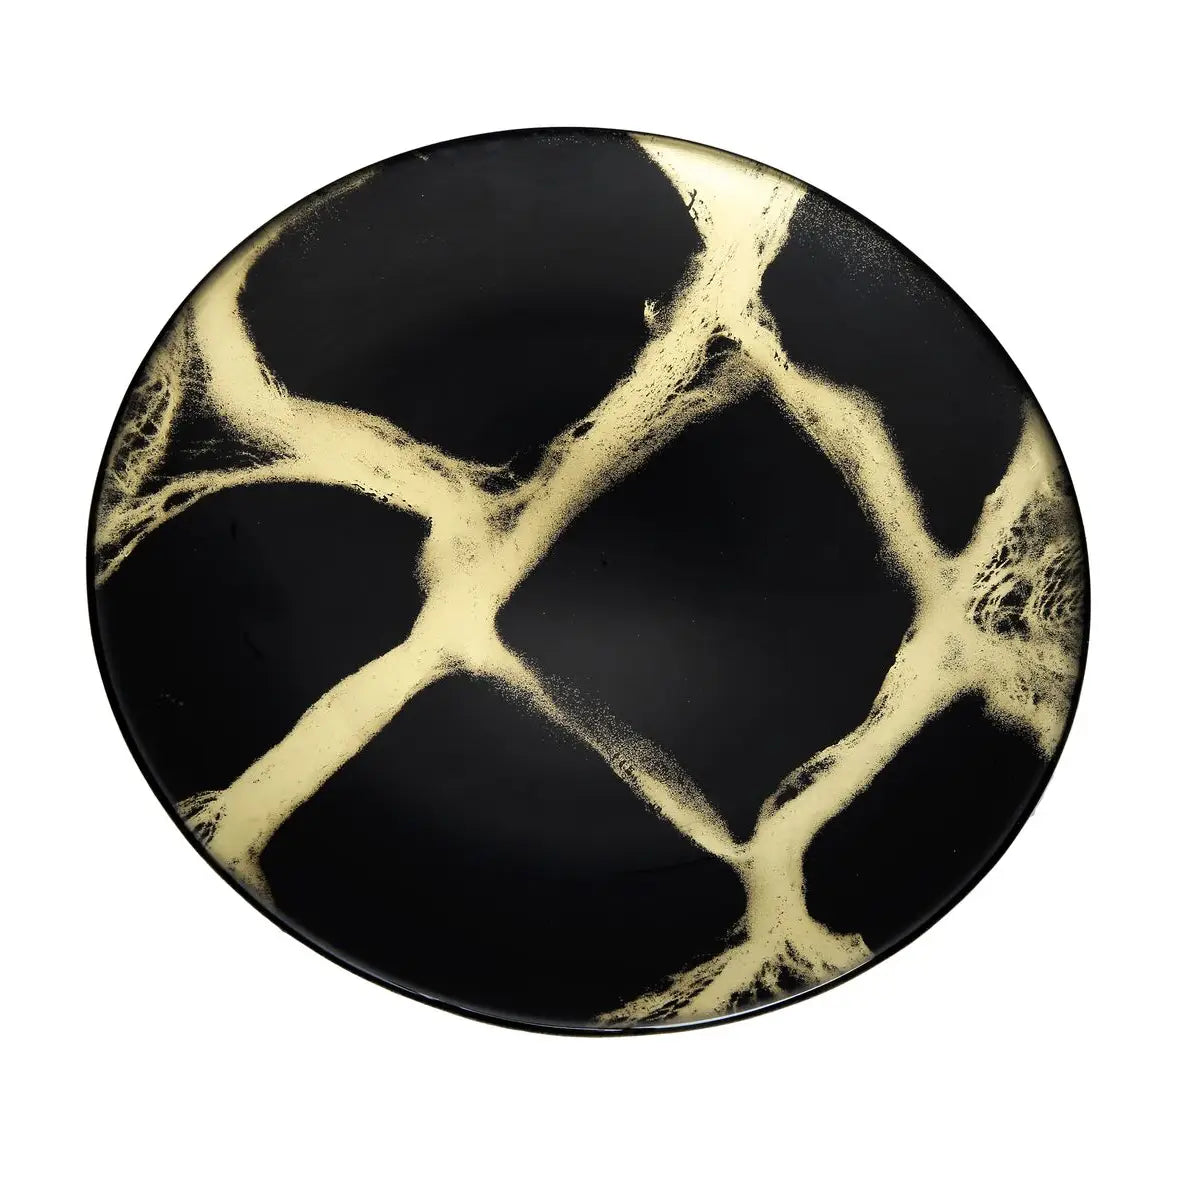 8.25" Black and Gold Marbleized Plate